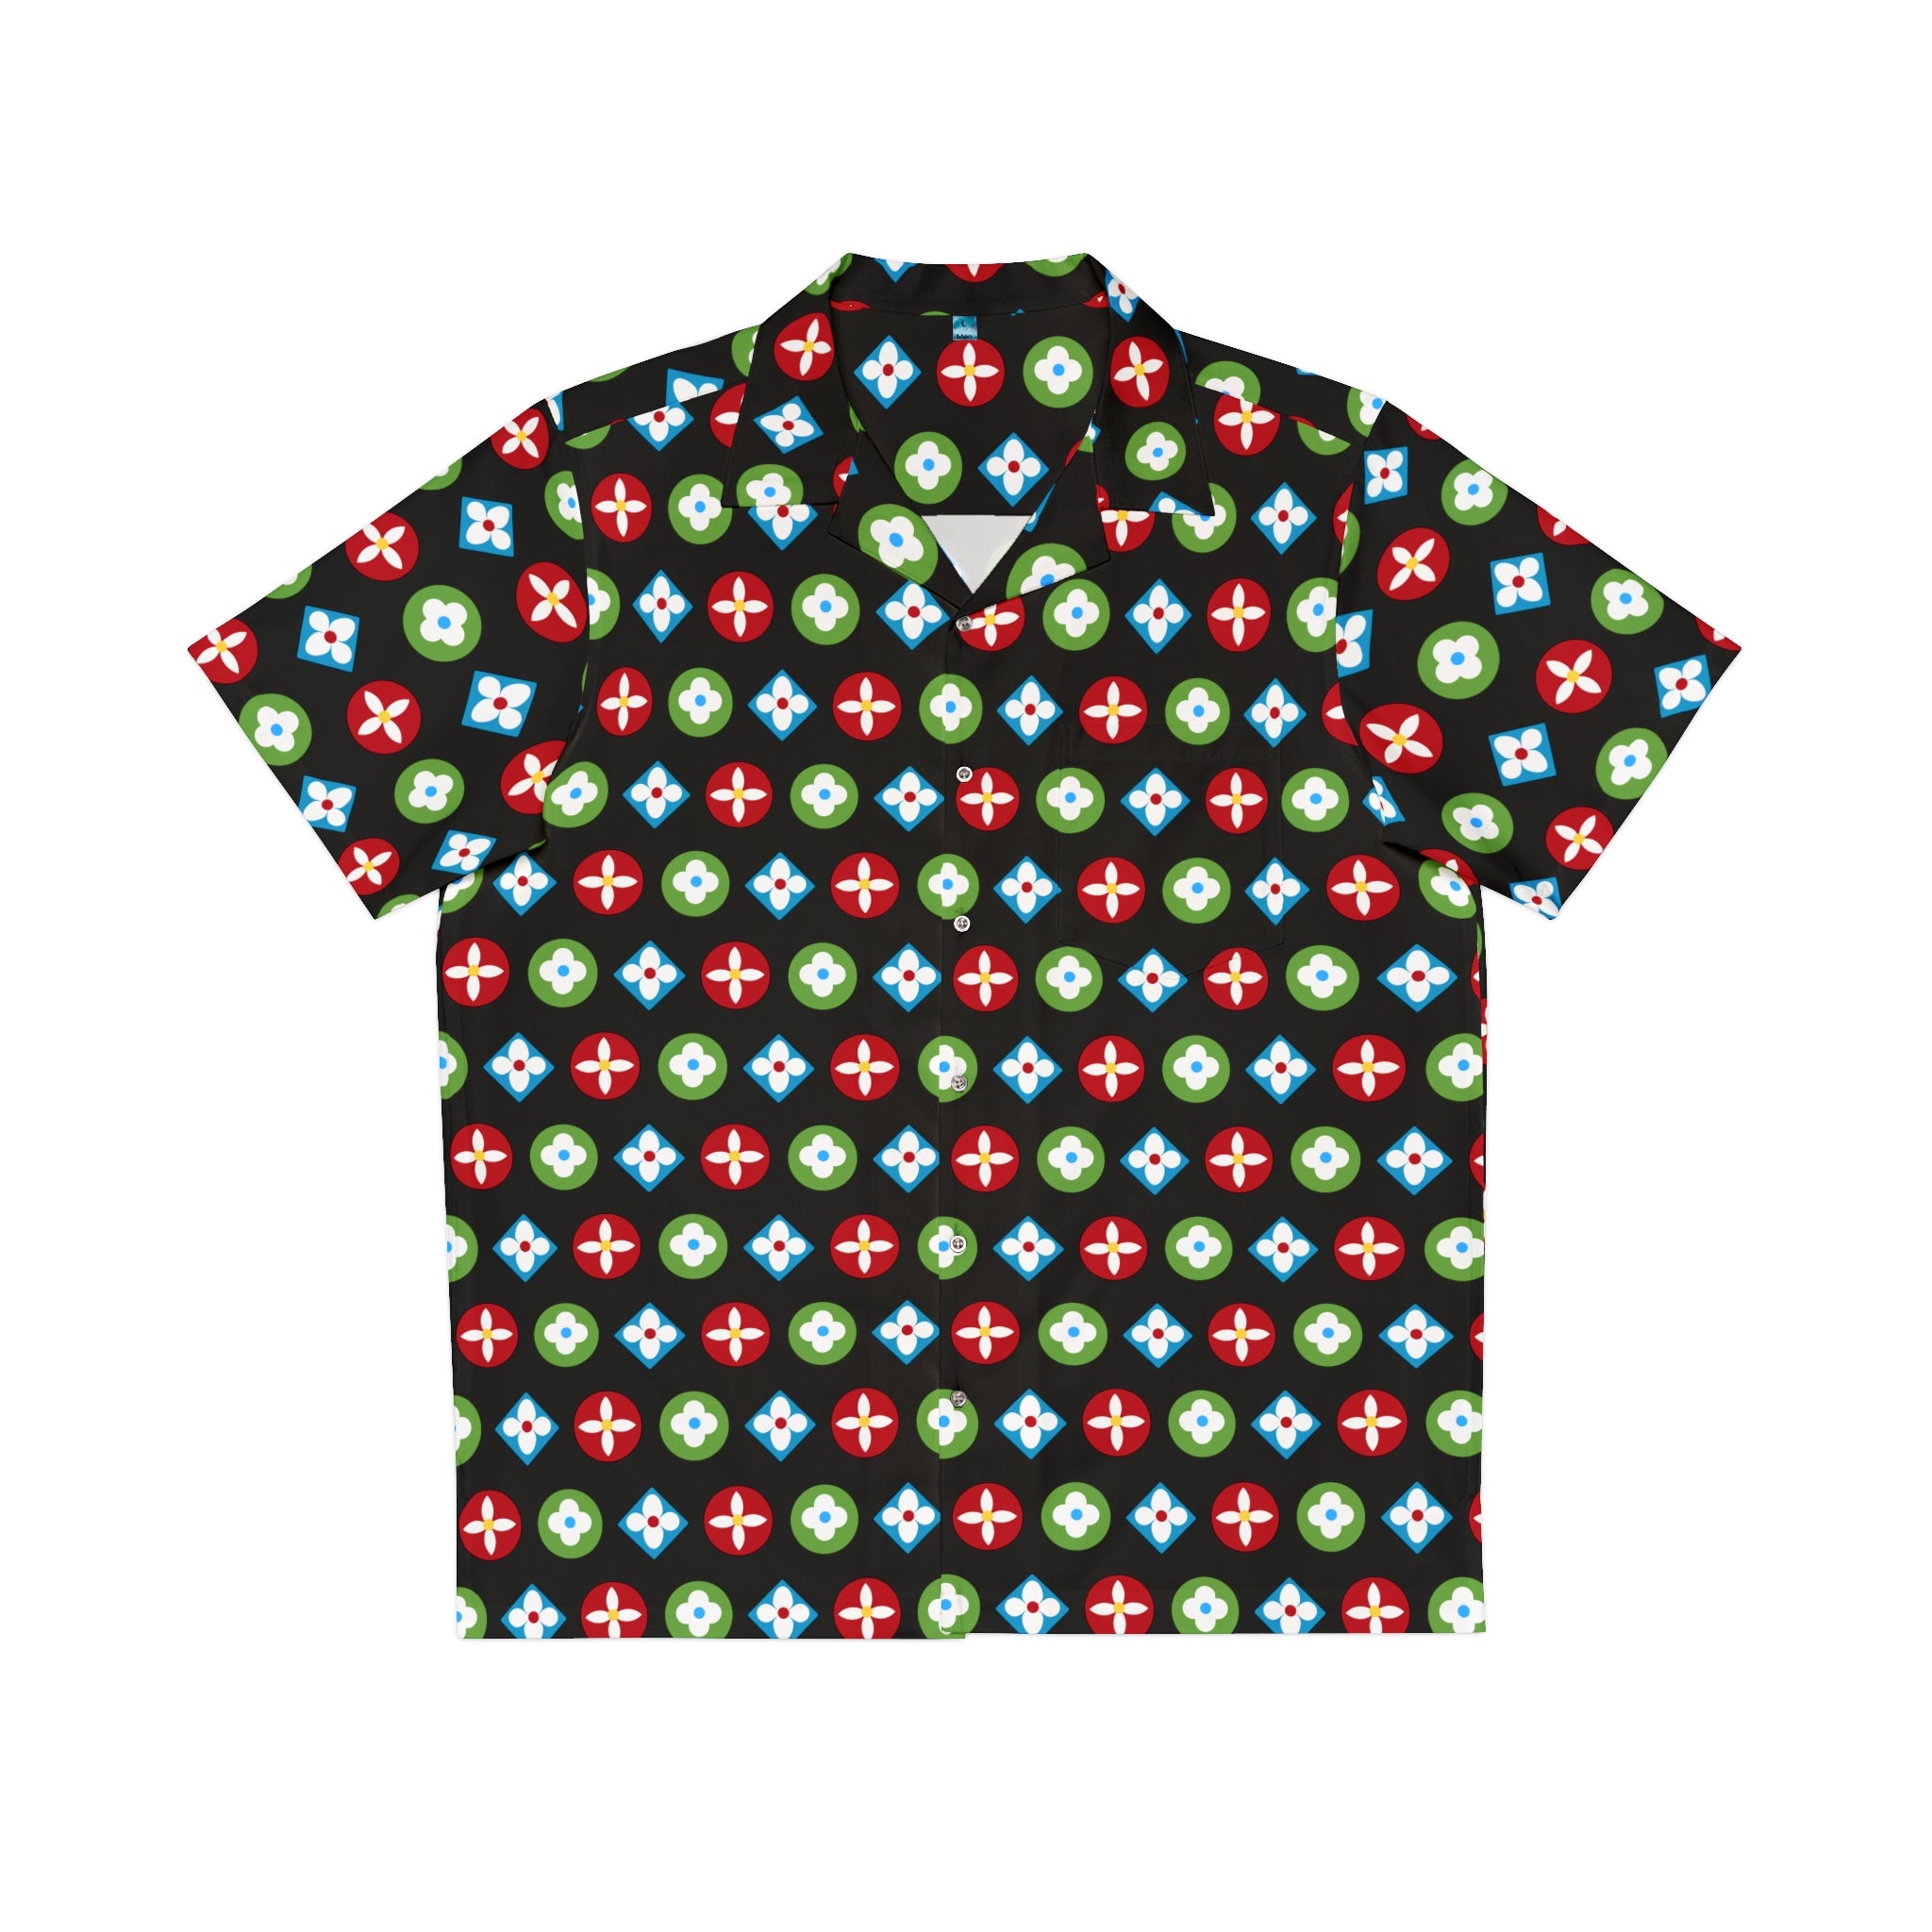  Groove Collection Trilogy of Icons Pattern (Red, Green, Blue) Black Unisex Gender Neutral Button Up Shirt, Hawaiian Shirt Men's Shirts5XLWhite